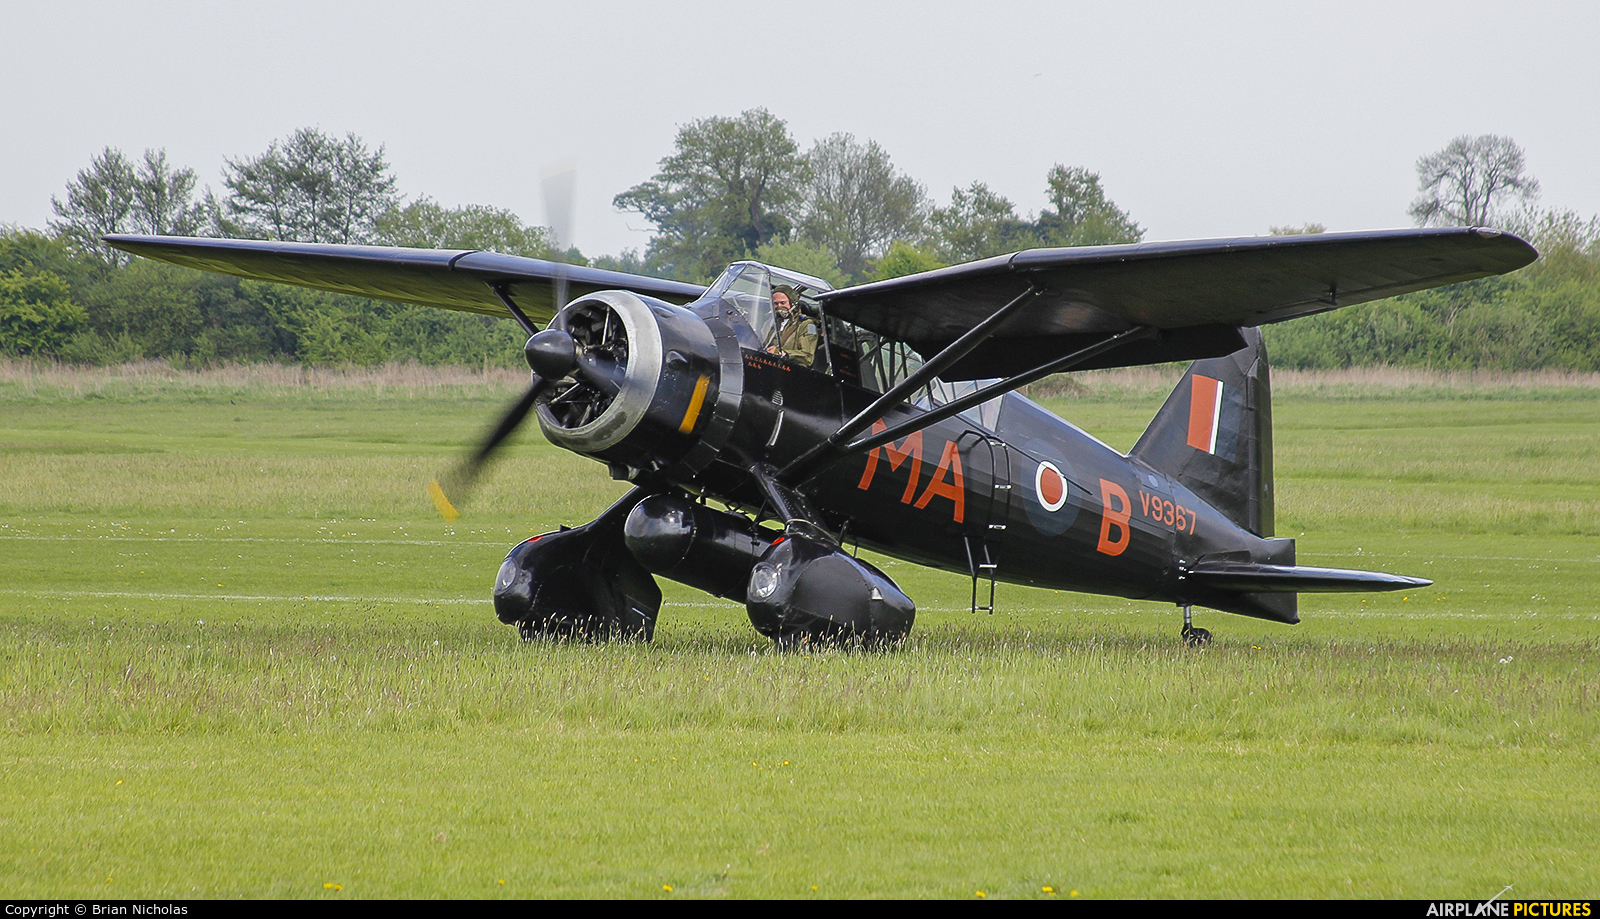 The Shuttleworth Collection G-AZWT aircraft at Old Warden